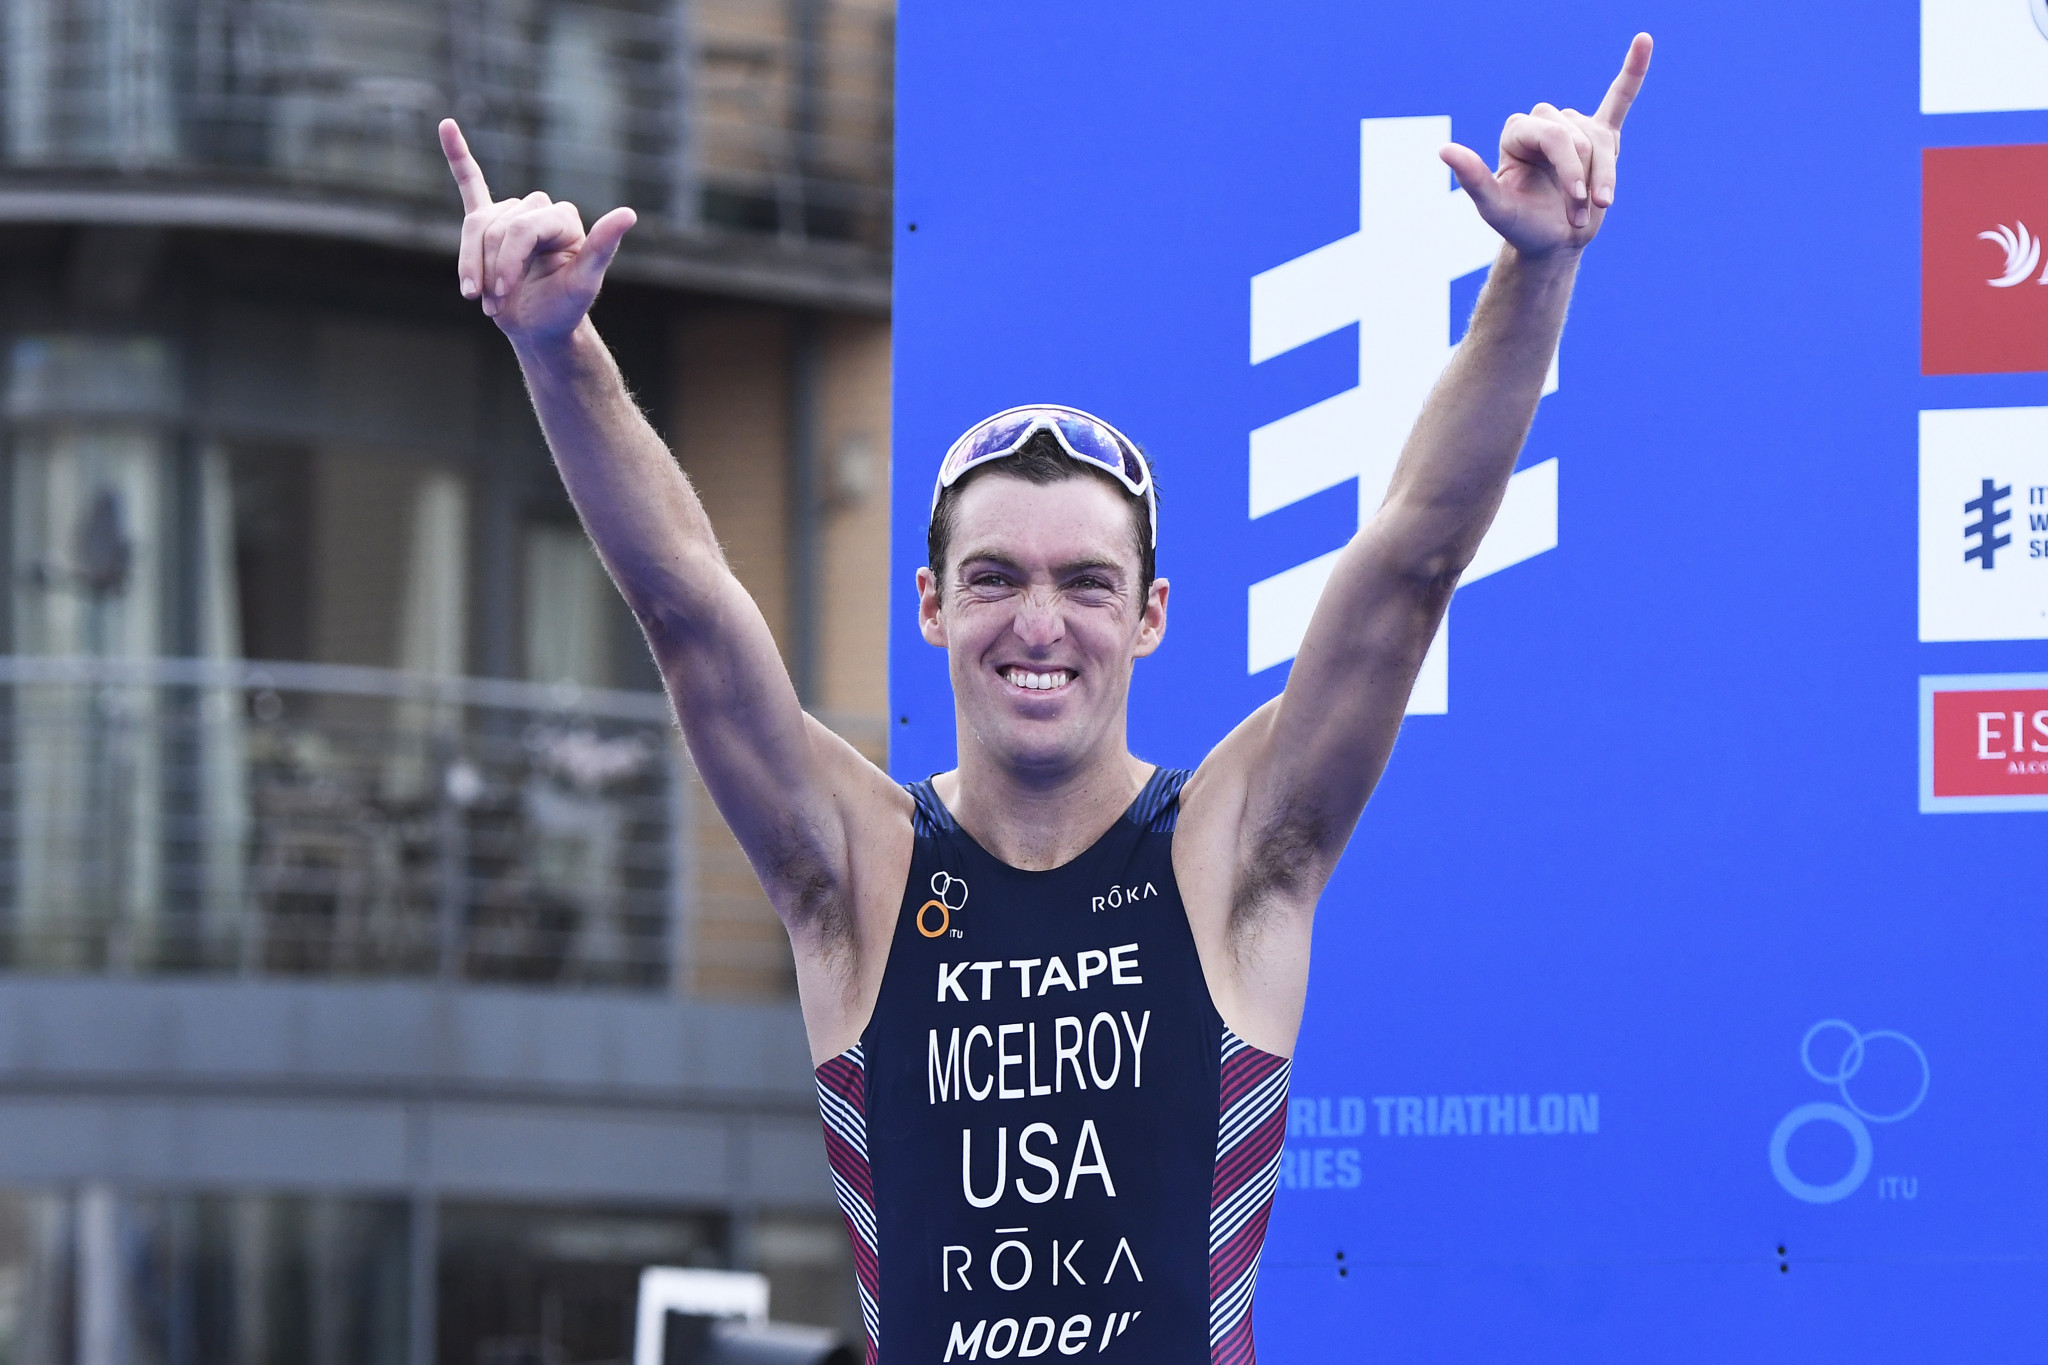 America's Matthew McElroy will hope for a maiden World Cup victory in Nur-Sultan ©Getty Images